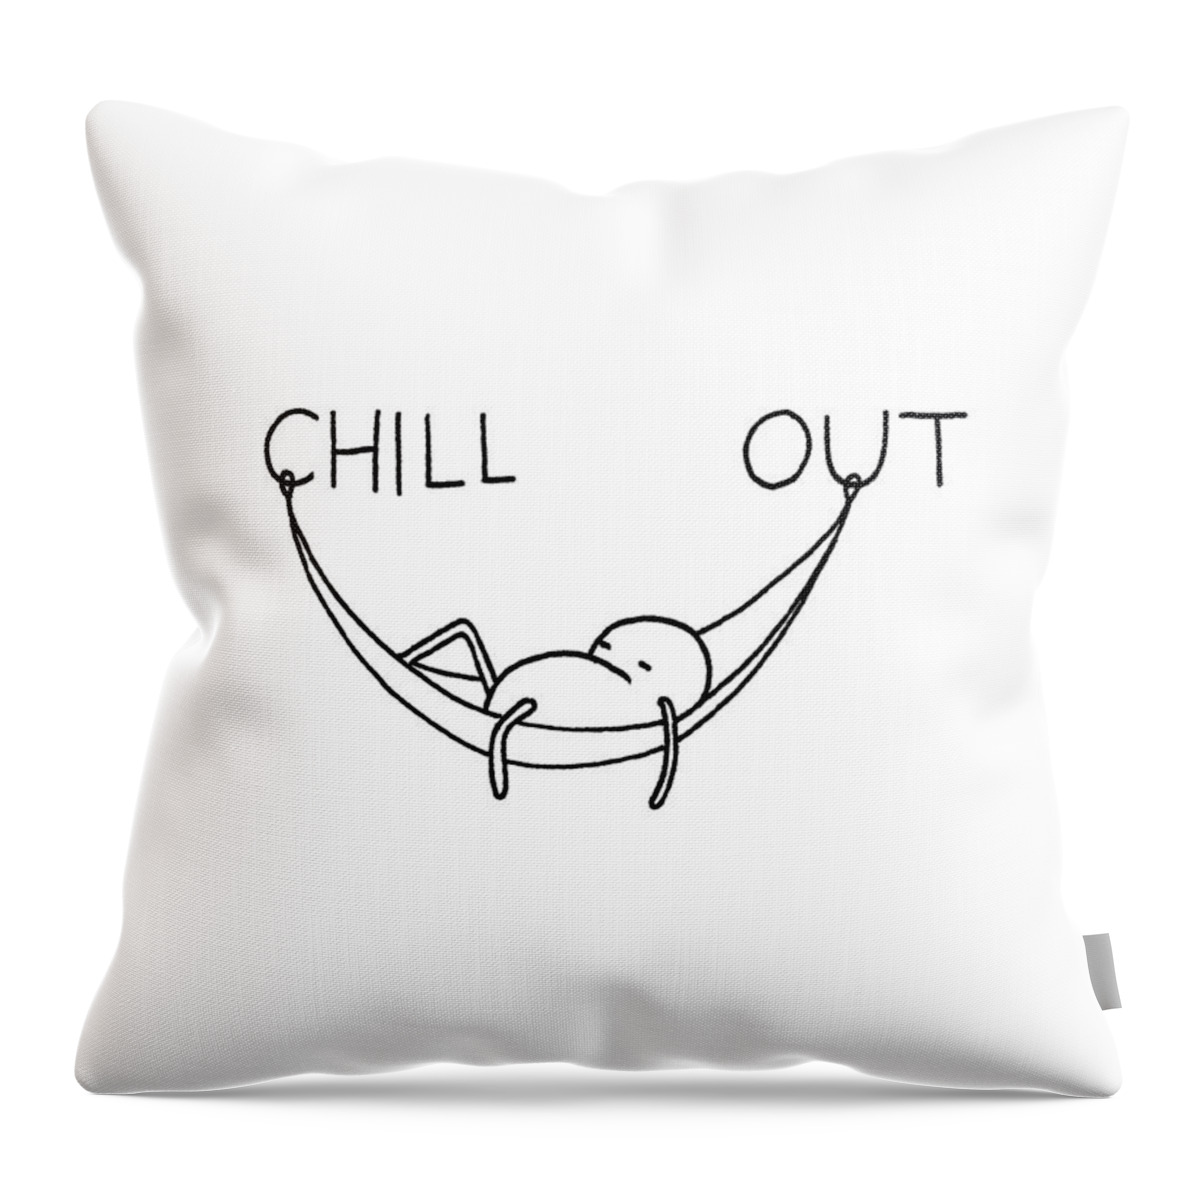 Chill Out by Smith and Ford